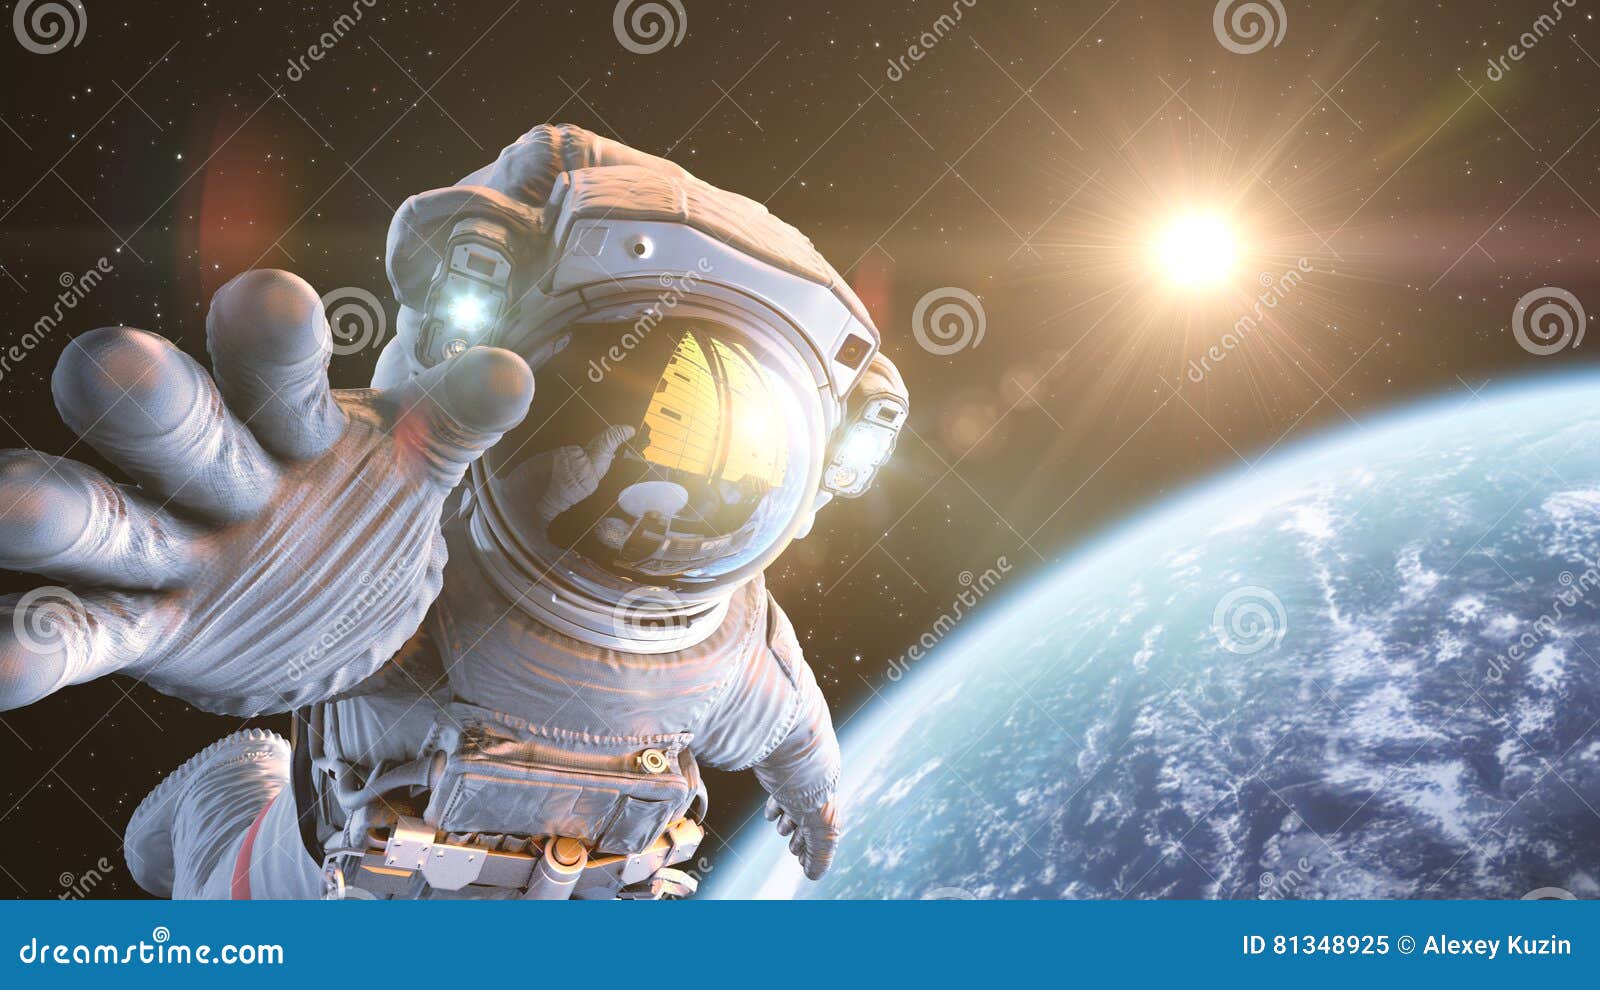 astronaut in outer space